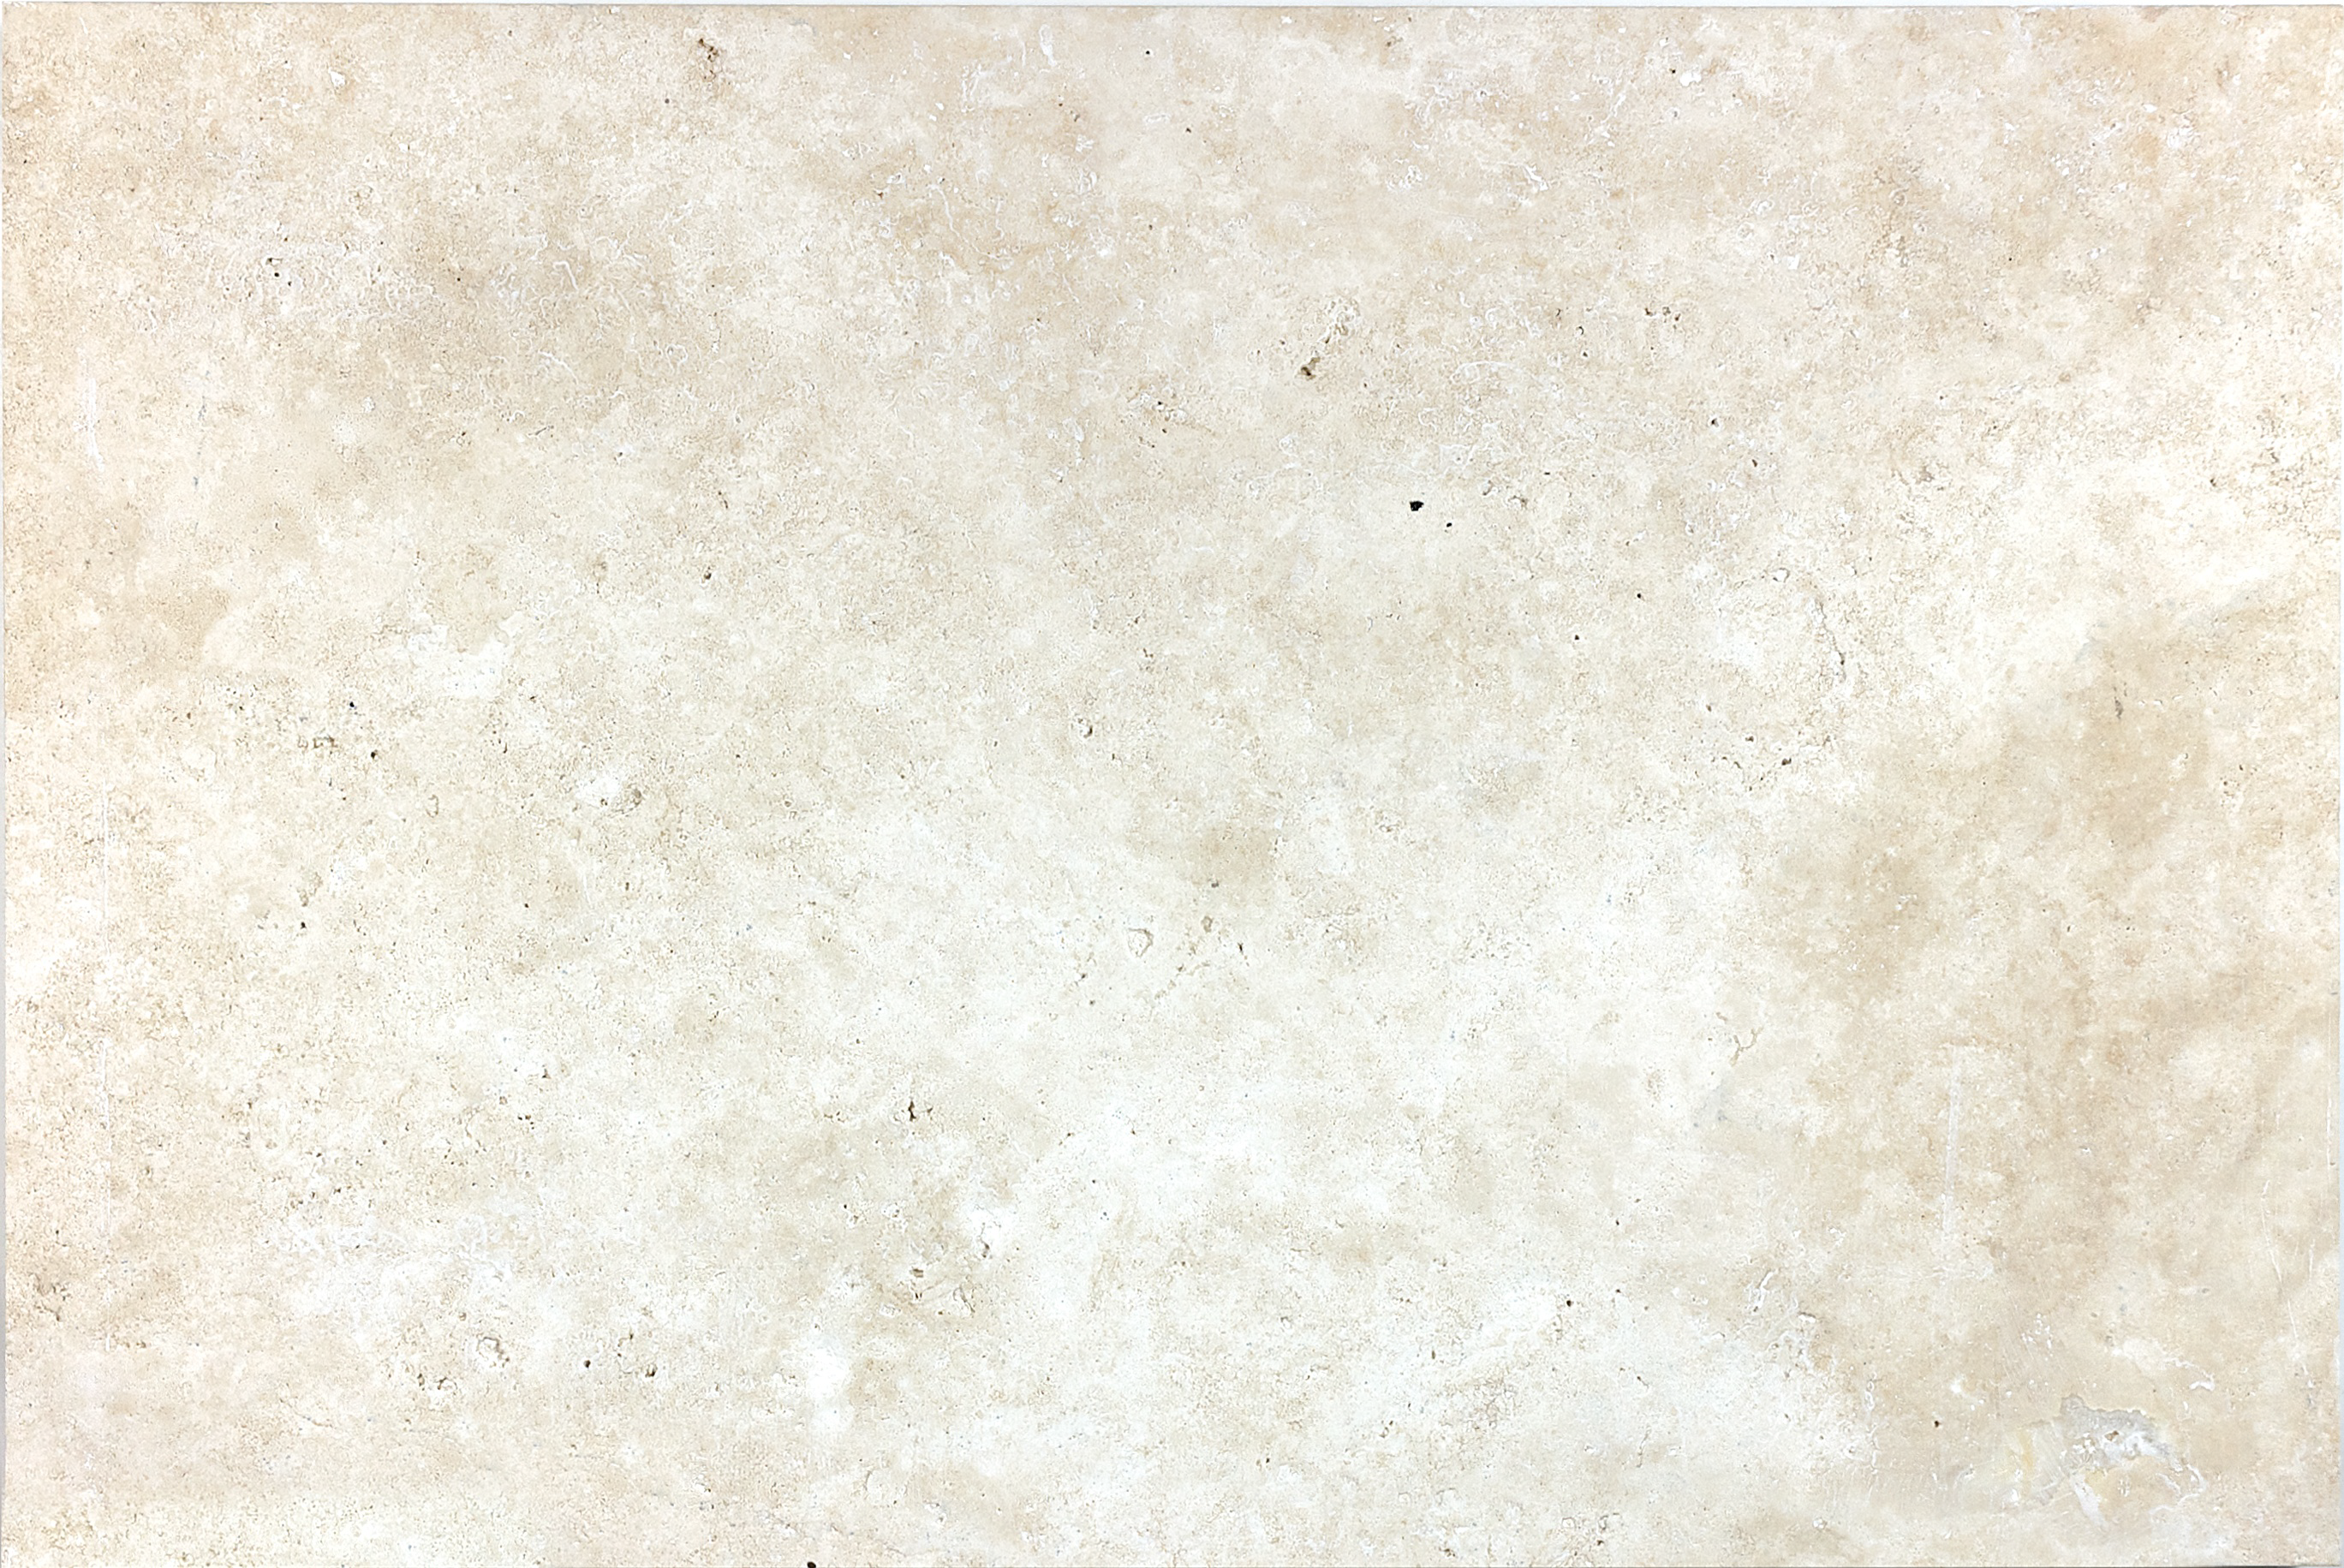 travertine pattern natural stone field tile from ivory anatolia collection distributed by surface group international brushed finish straight edge edge 16x24 rectangle shape